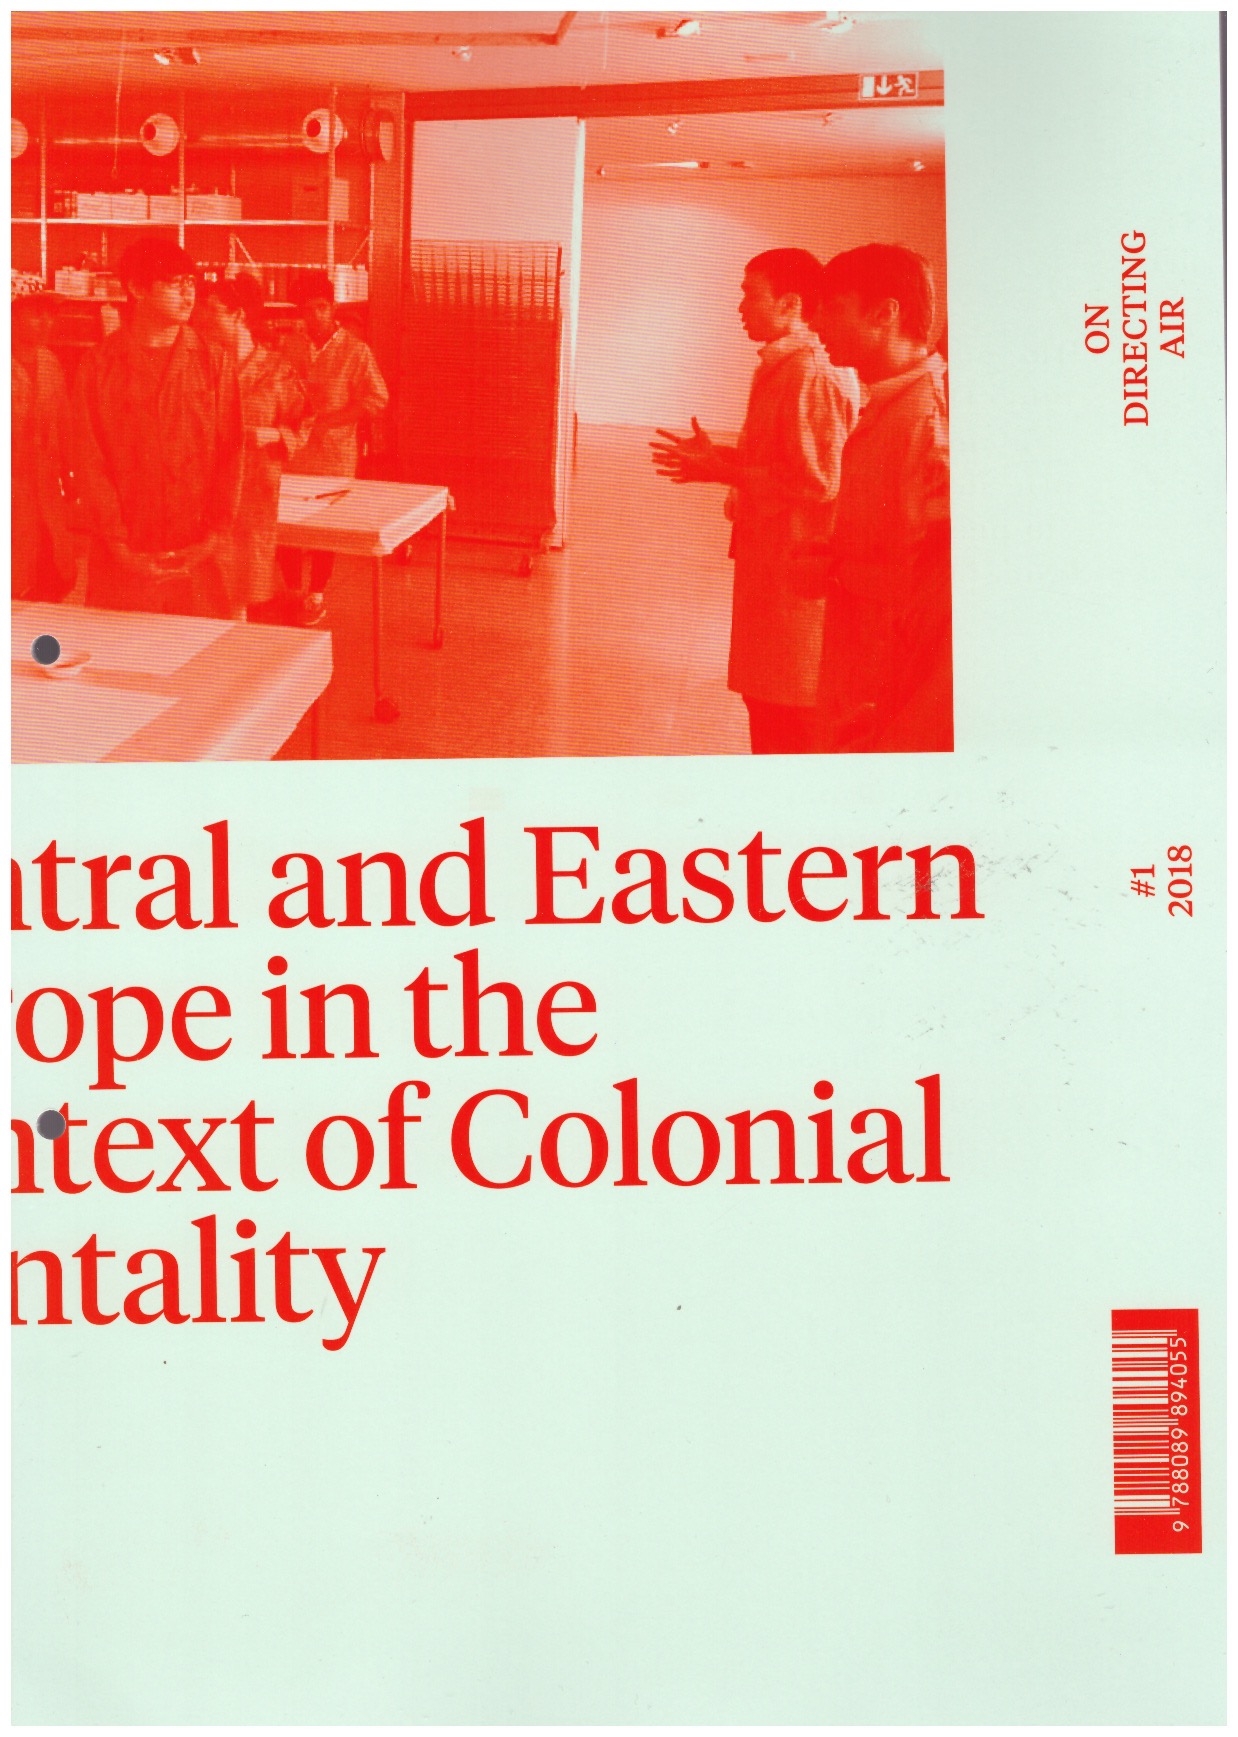 JURICA, Ivan (ed.) - On Directing Air 2018 #1: Central and Eastern Europe in the Context of Colonial Mentality